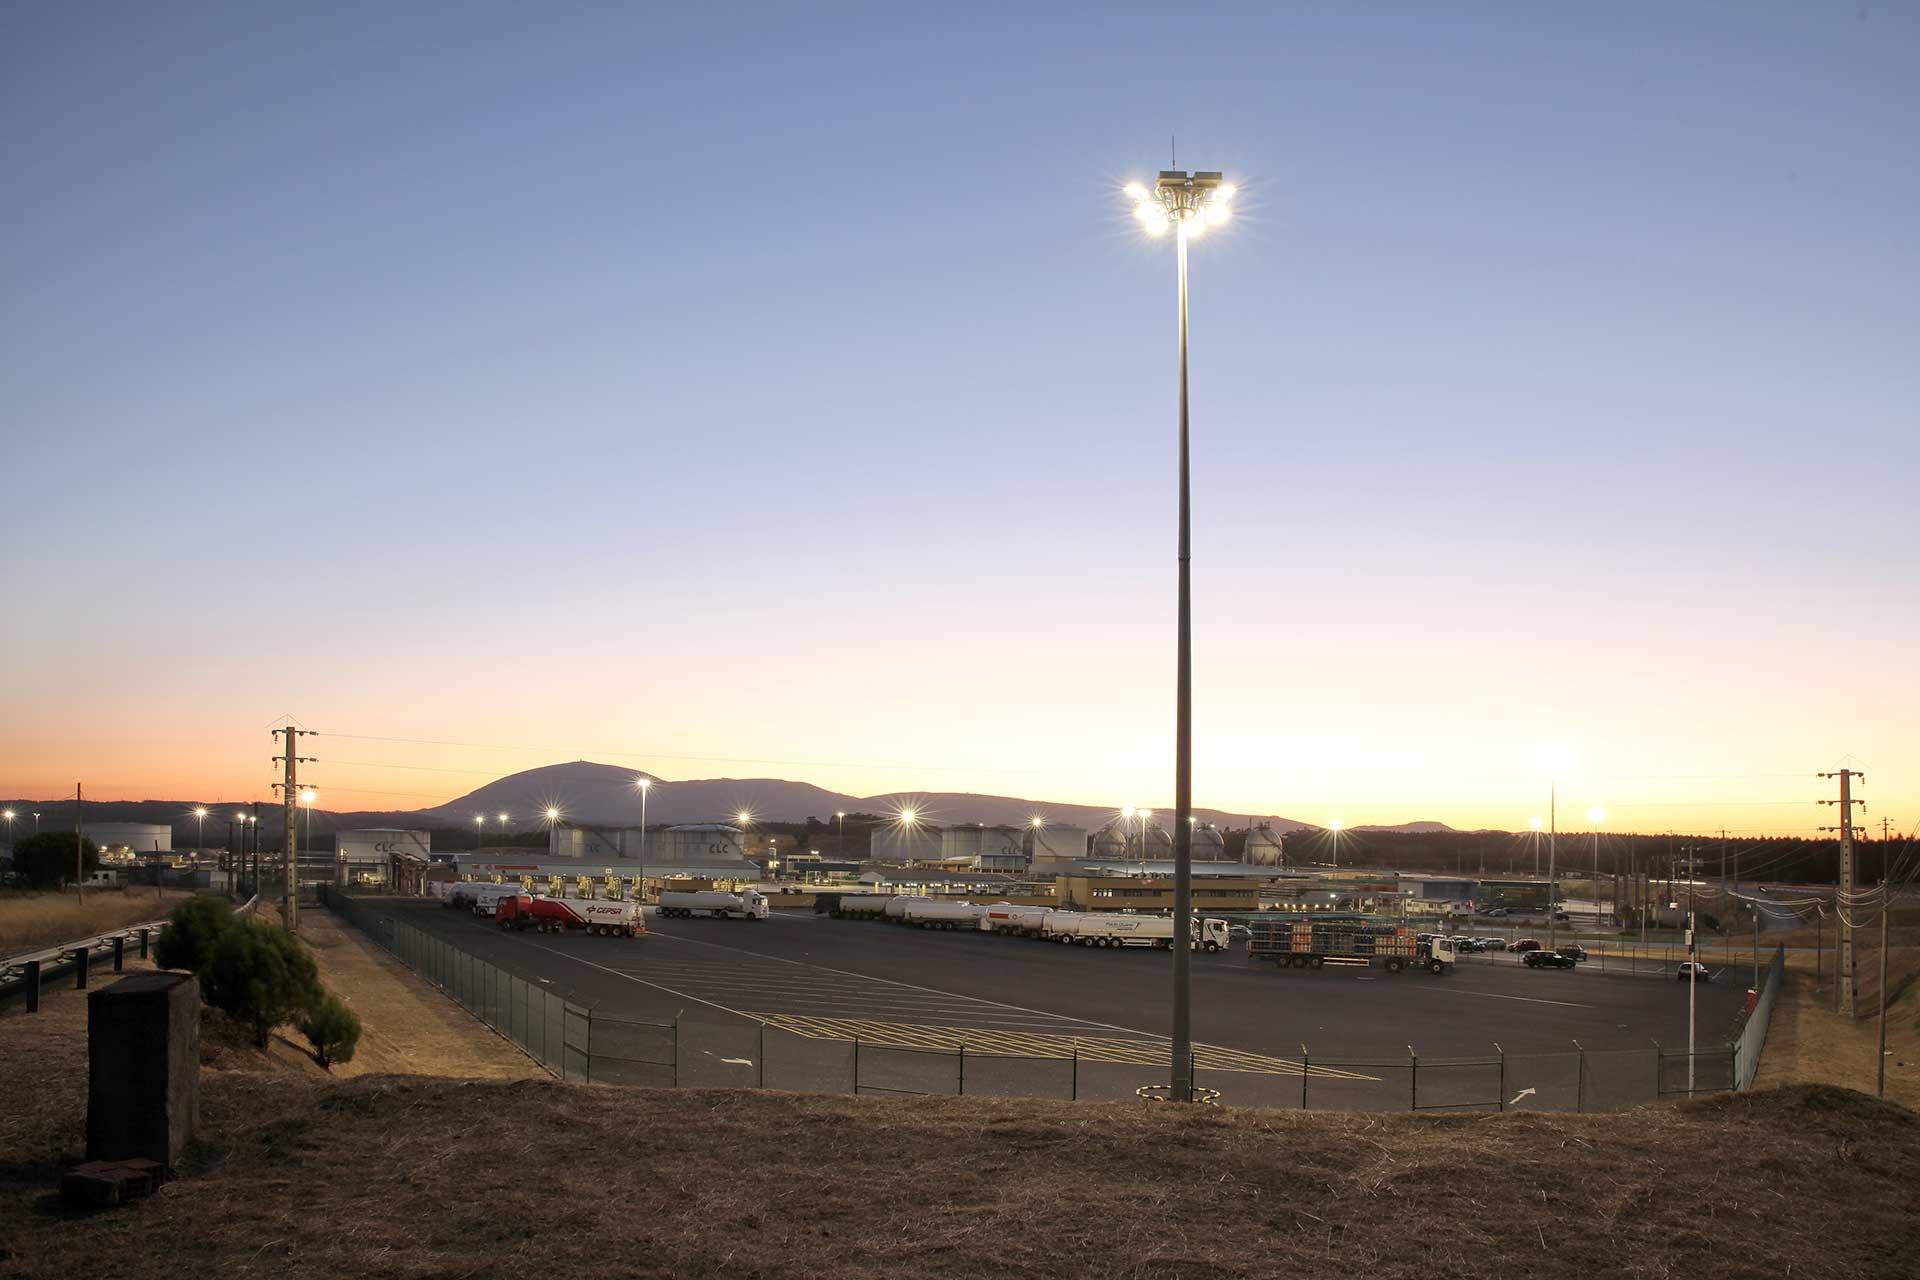 Schréder industry lighting solution cut energy costs by 77% for CLC